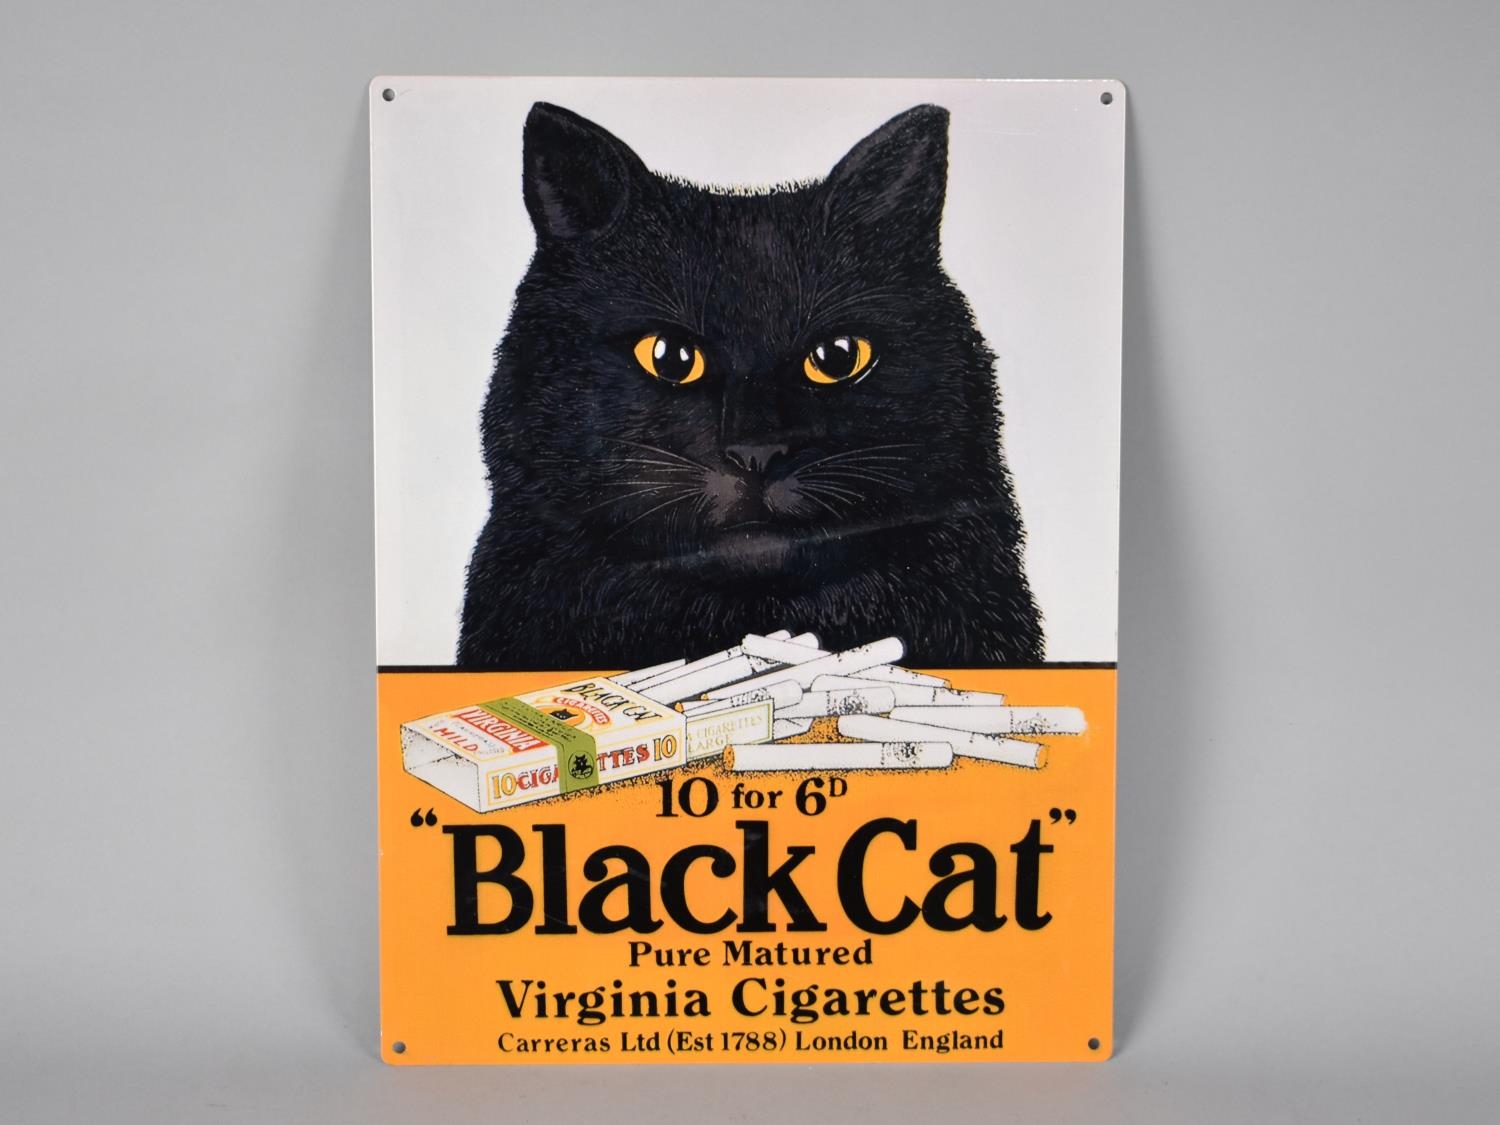 A Reproduction American Poster for Black Cat Cigarettes, Printed on Tin, 30x40cms